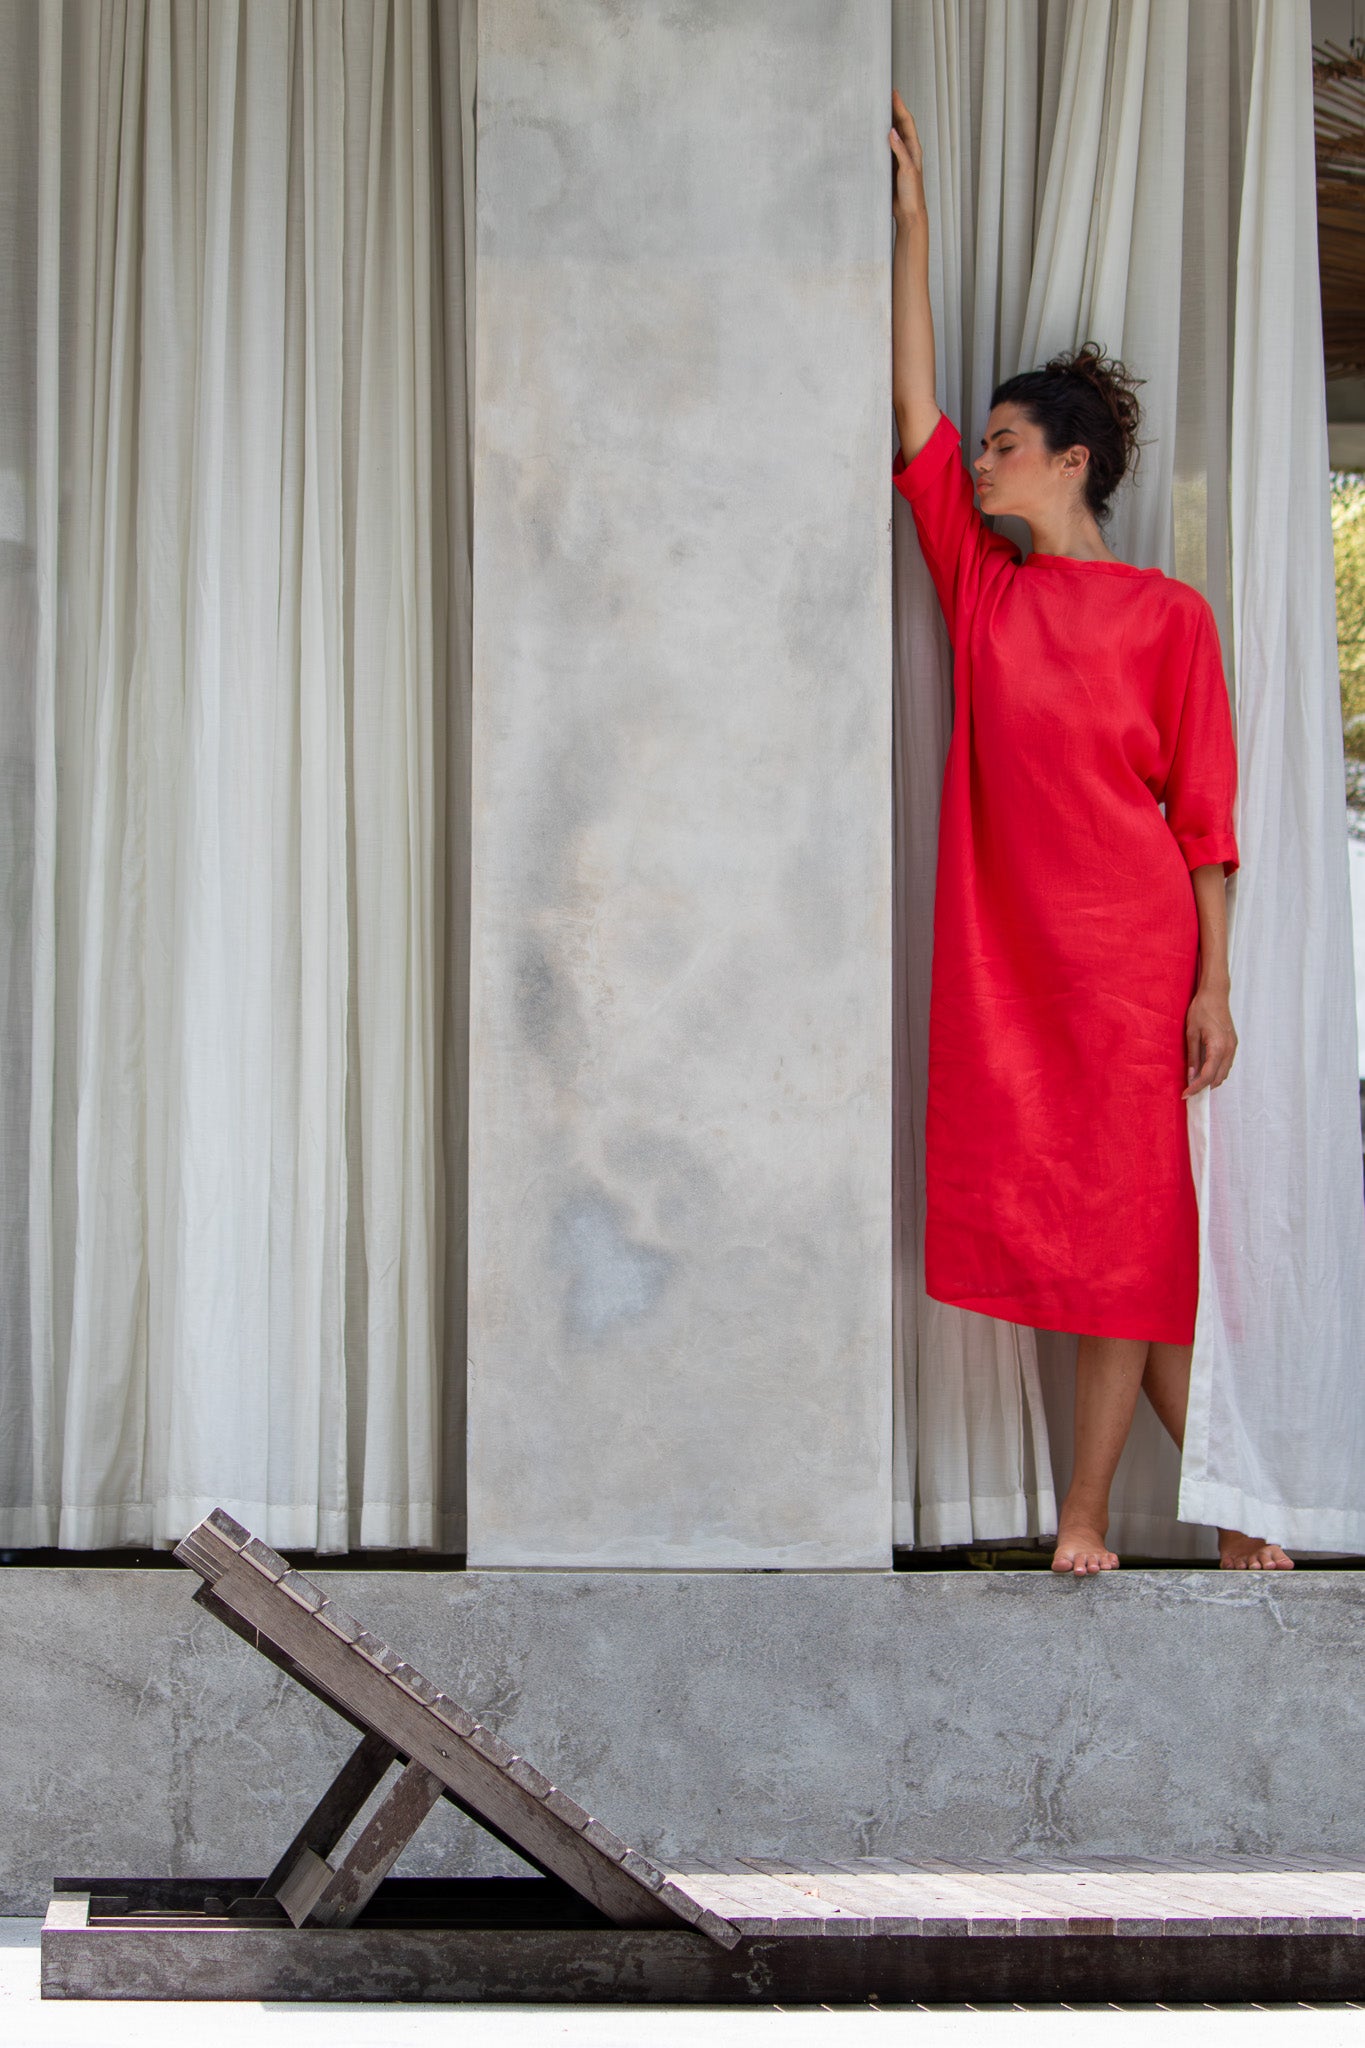 Model Striking stunning pose leaning up against the wall in red linen dress